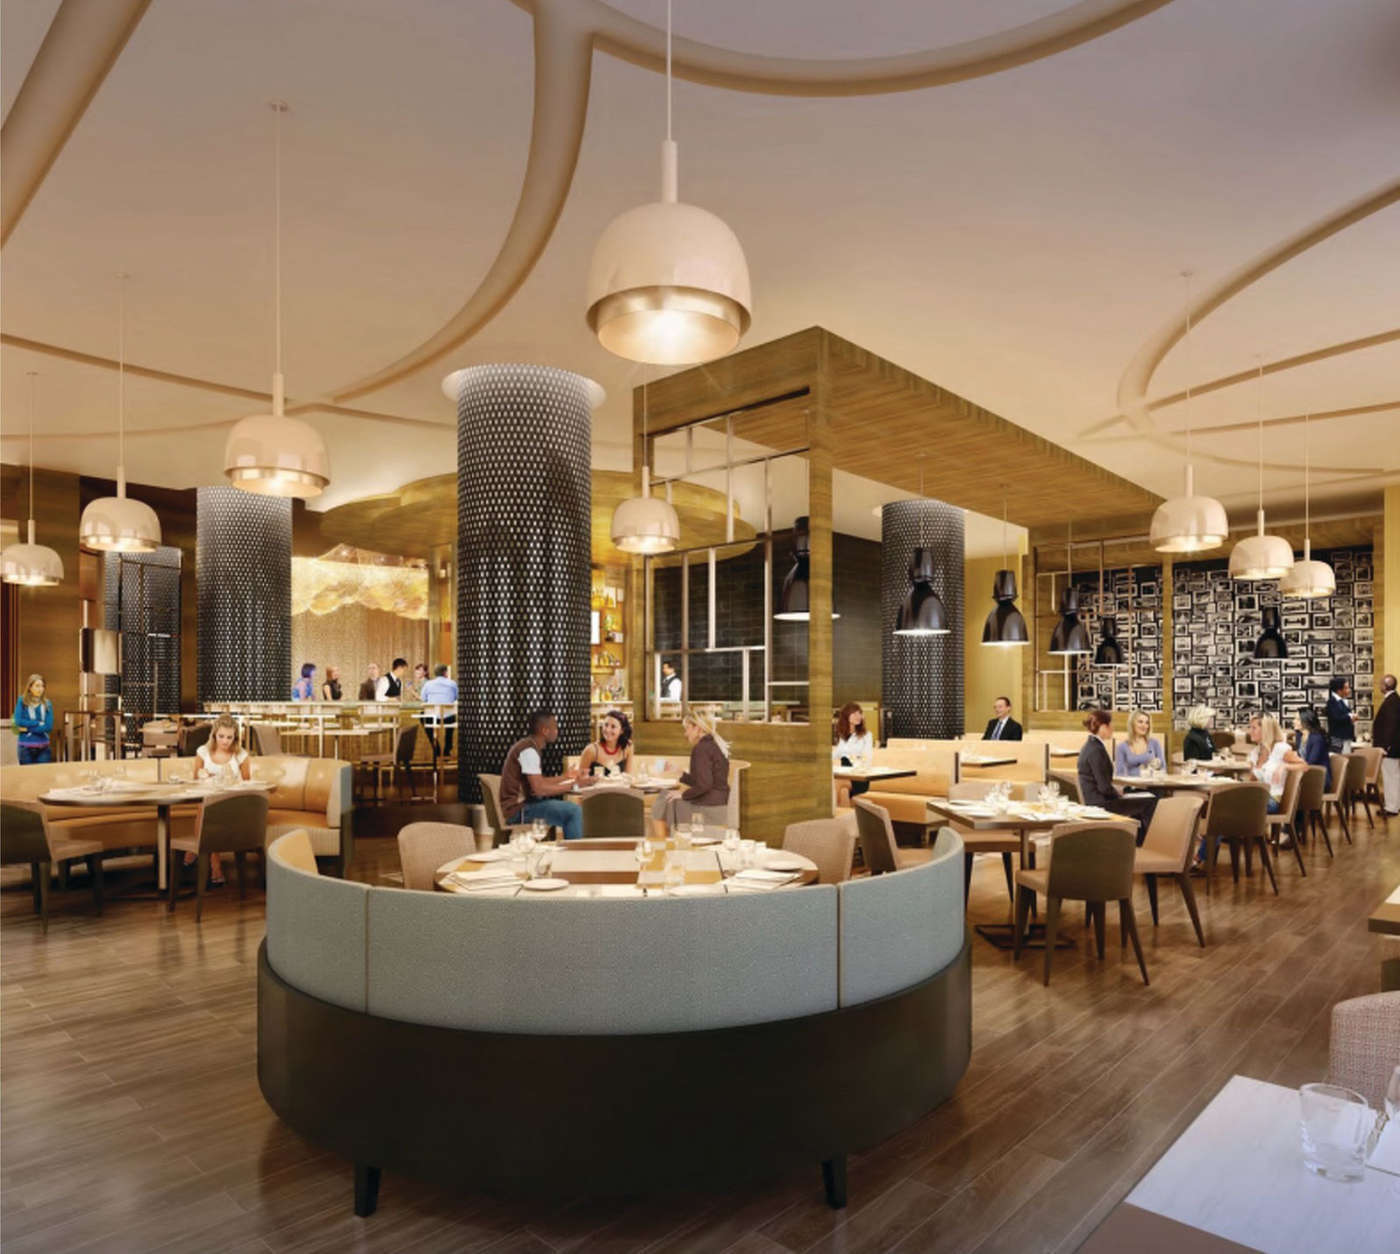 An interior rendering of David's Cafe by Todd English, named after The Cordish Companies’ Chairman David Cordish, which will feature an eclectic menu of culinary creations inspired by David’s global travels and favorite tastes. (PRNewsfoto/Live! Casino and Hotel)